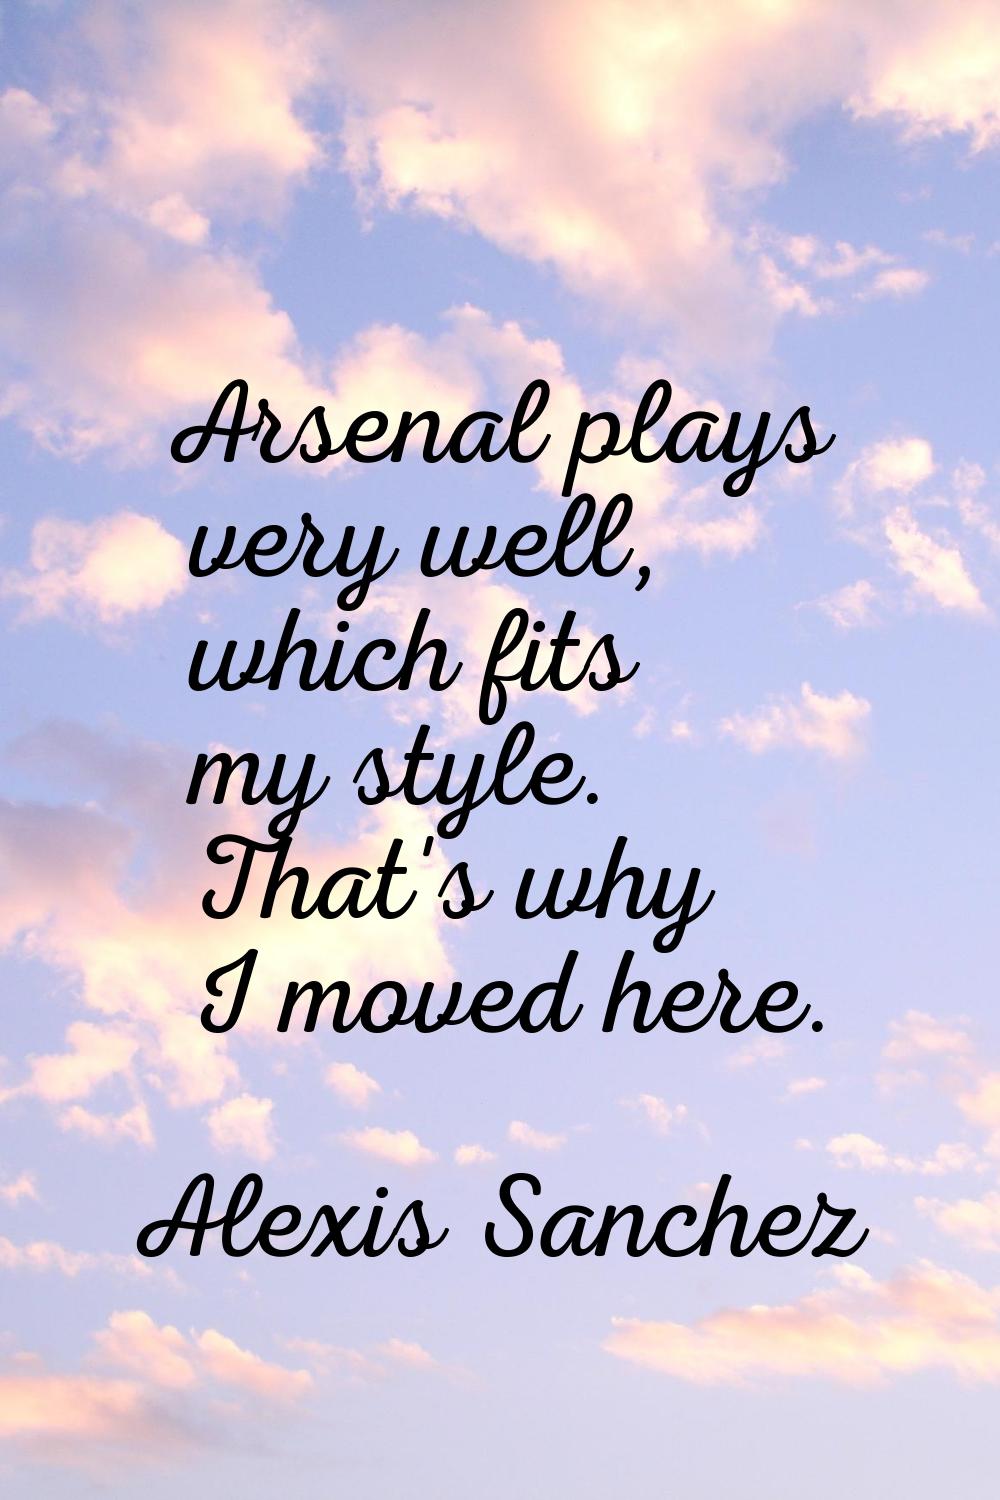 Arsenal plays very well, which fits my style. That's why I moved here.